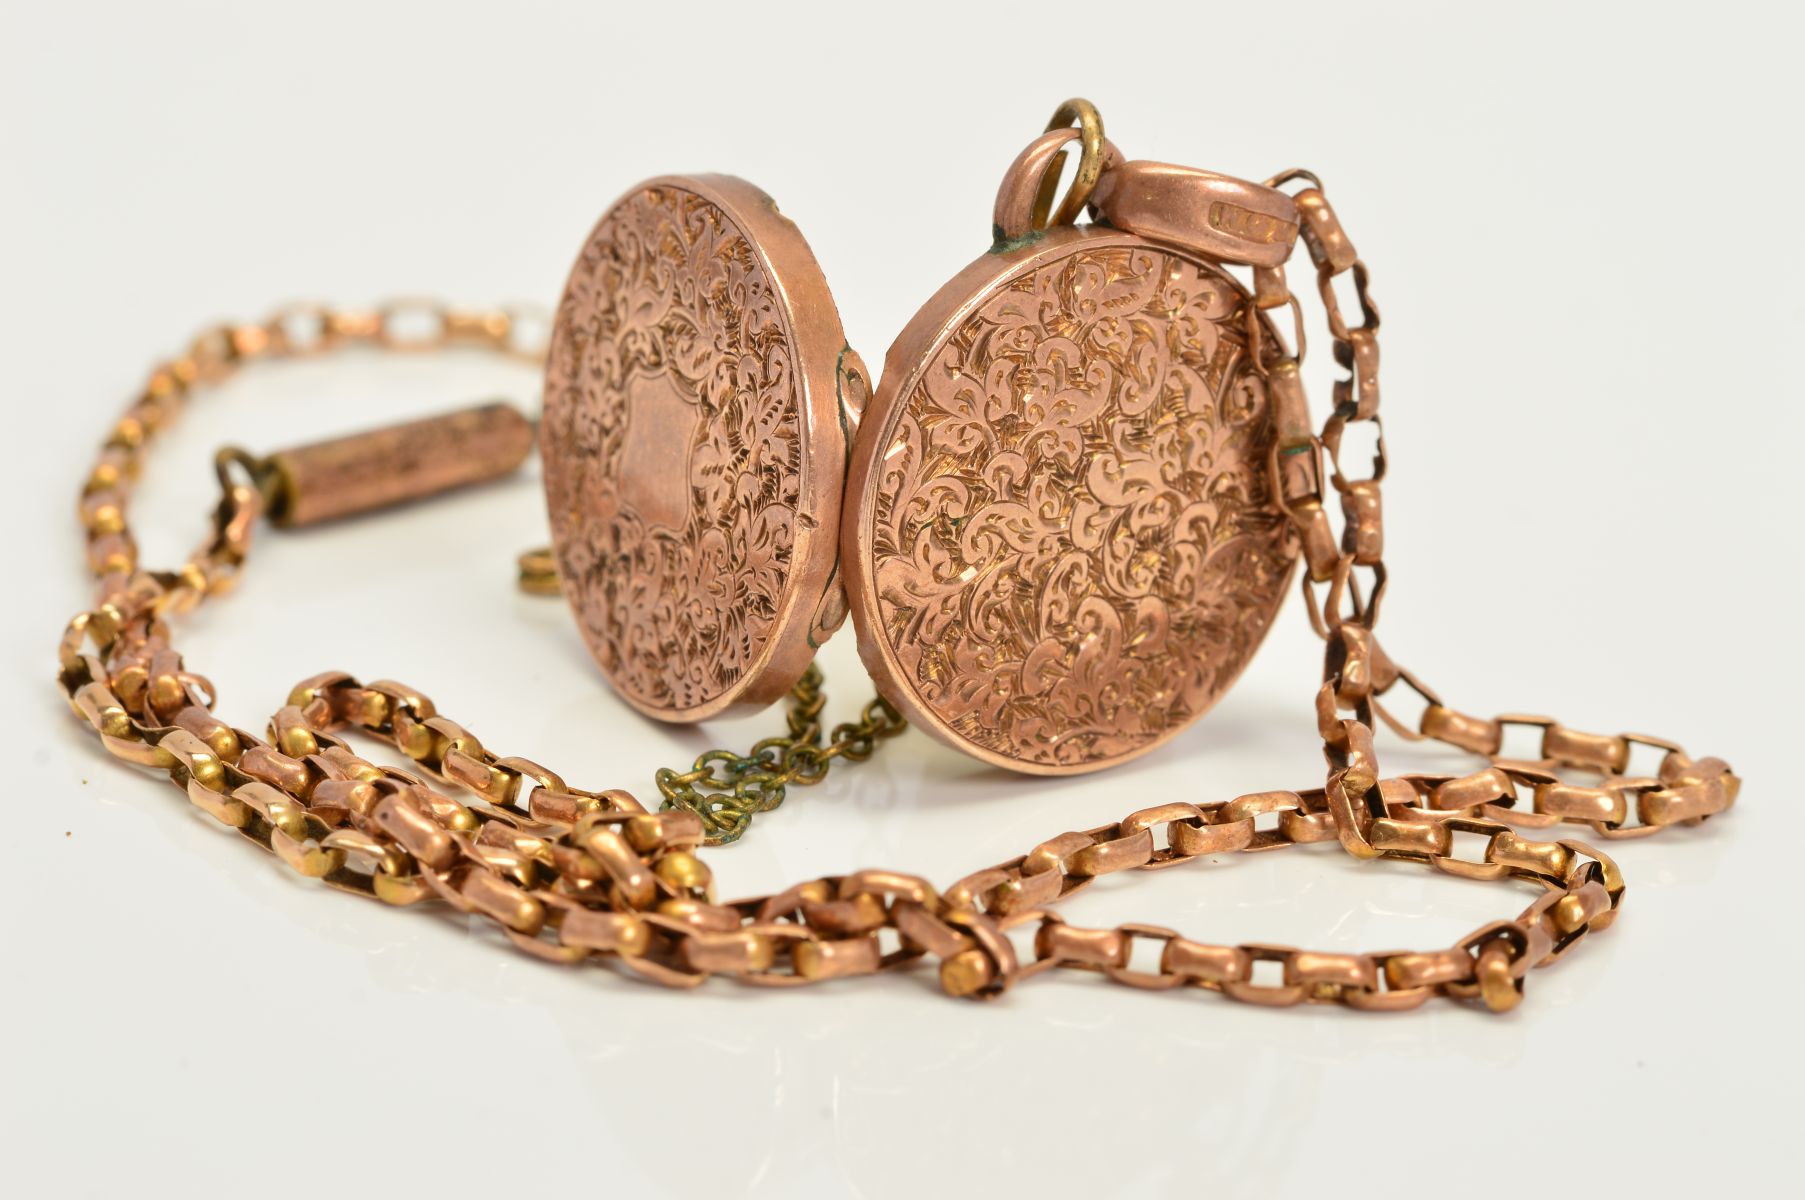 AN EARLY 20TH CENTURY 9CT ROSE GOLD LOCKET, round shape measuring approximately 20.5mm in